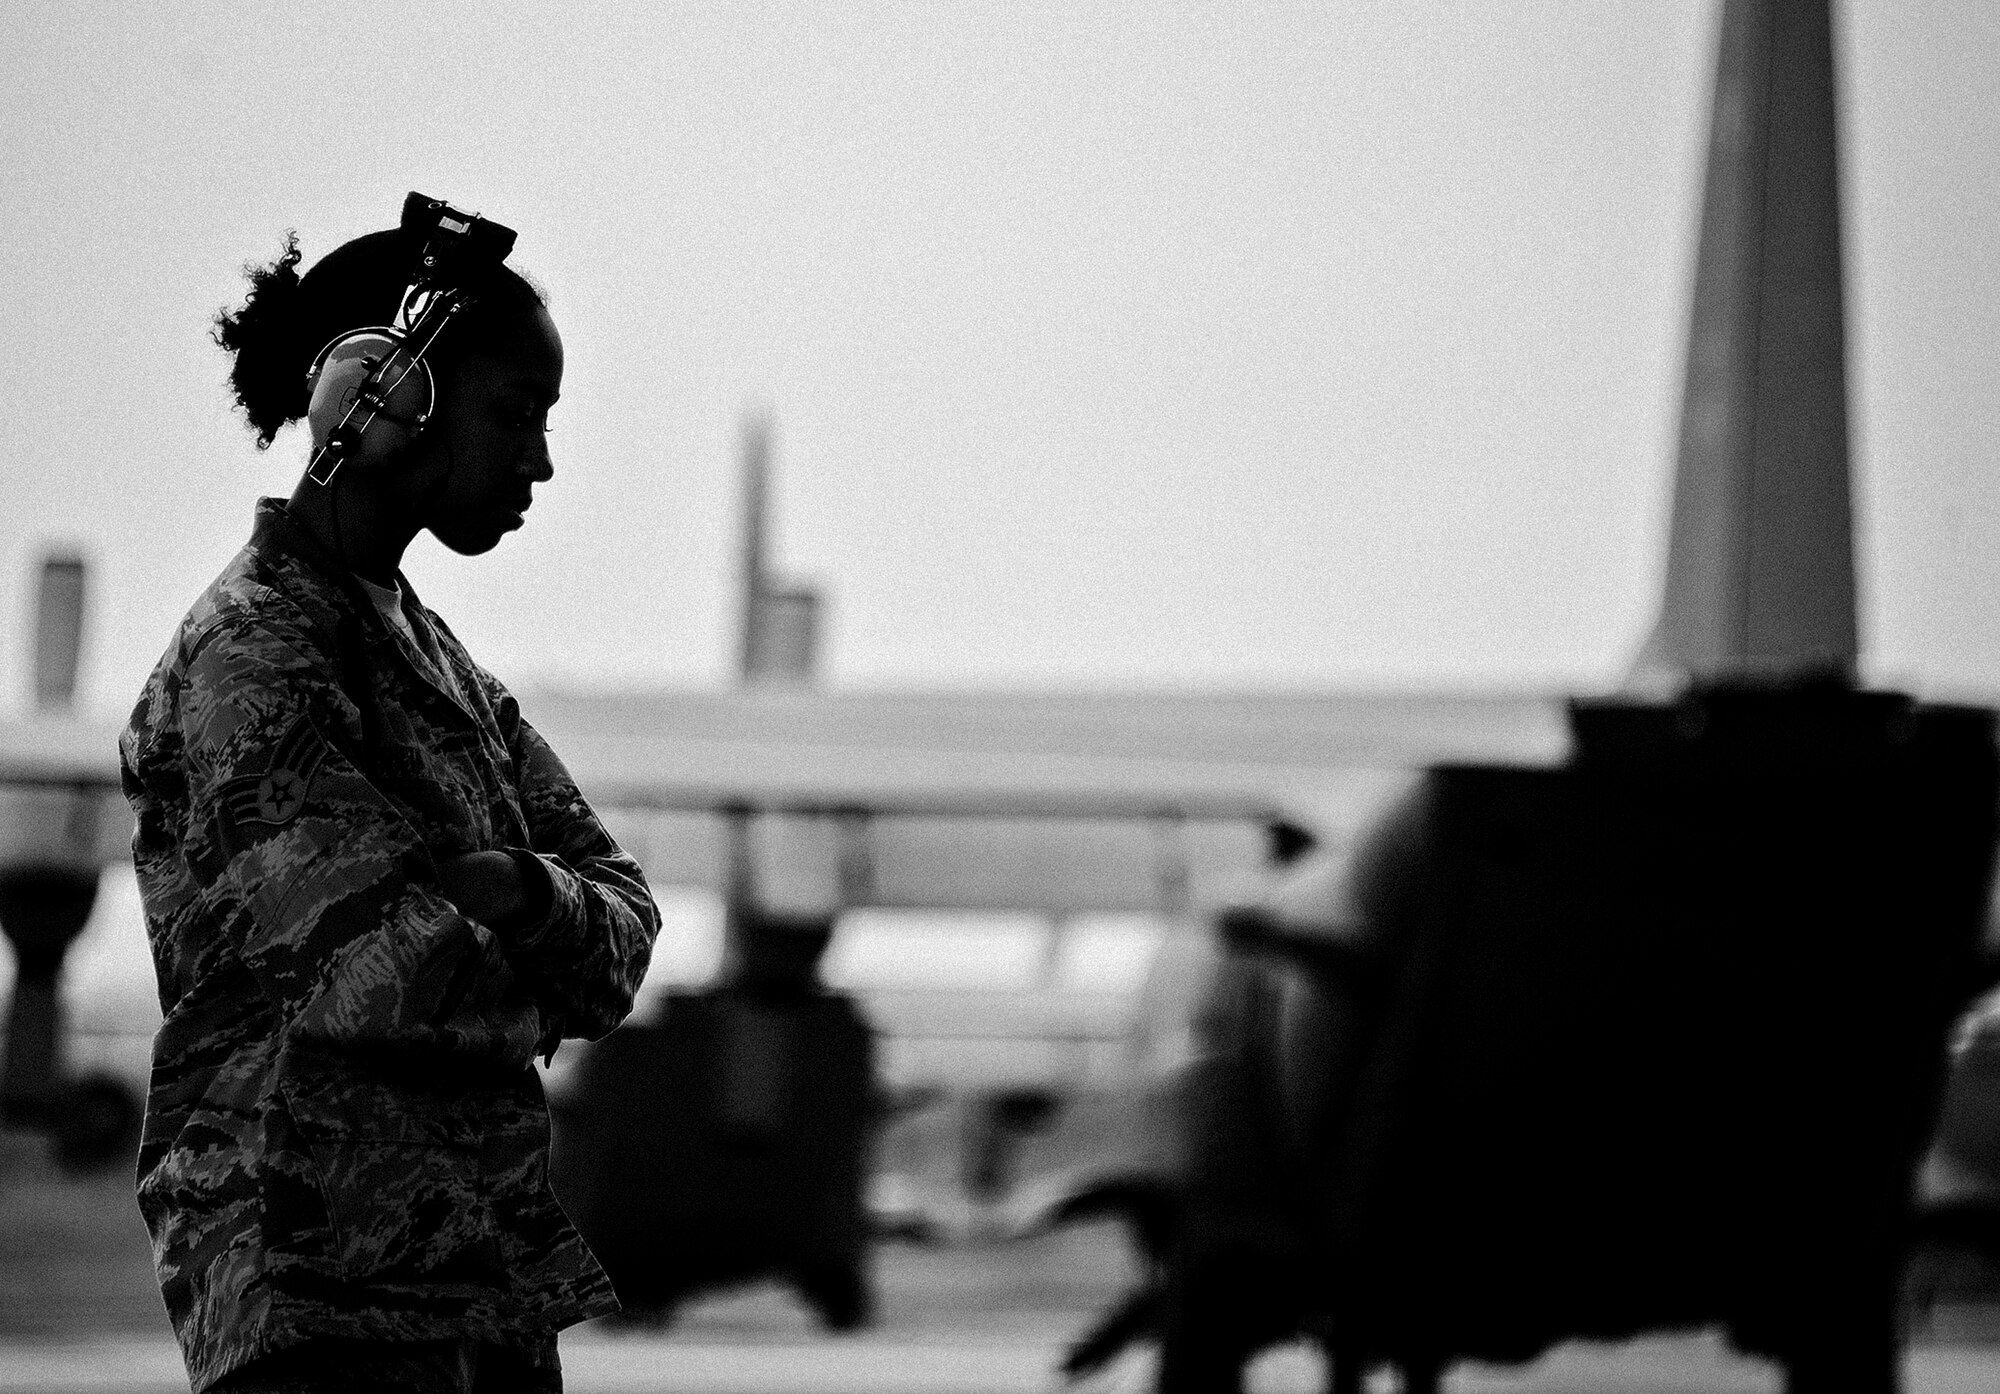 Senior Airman Alyson Hill, of the 919th Aircraft Maintenance Squadron, waits to begin preflight procedures on an MC-130E Combat Talon I at Duke Field, Fla.  There are only five Talons left at the special operations reserve base.  The 919th has begun remissioning to the Aviation Foreign Internal Defense aircraft, the C-145 Skytruck.  (U.S. Air Force photo/Tech. Sgt. Samuel King Jr.)